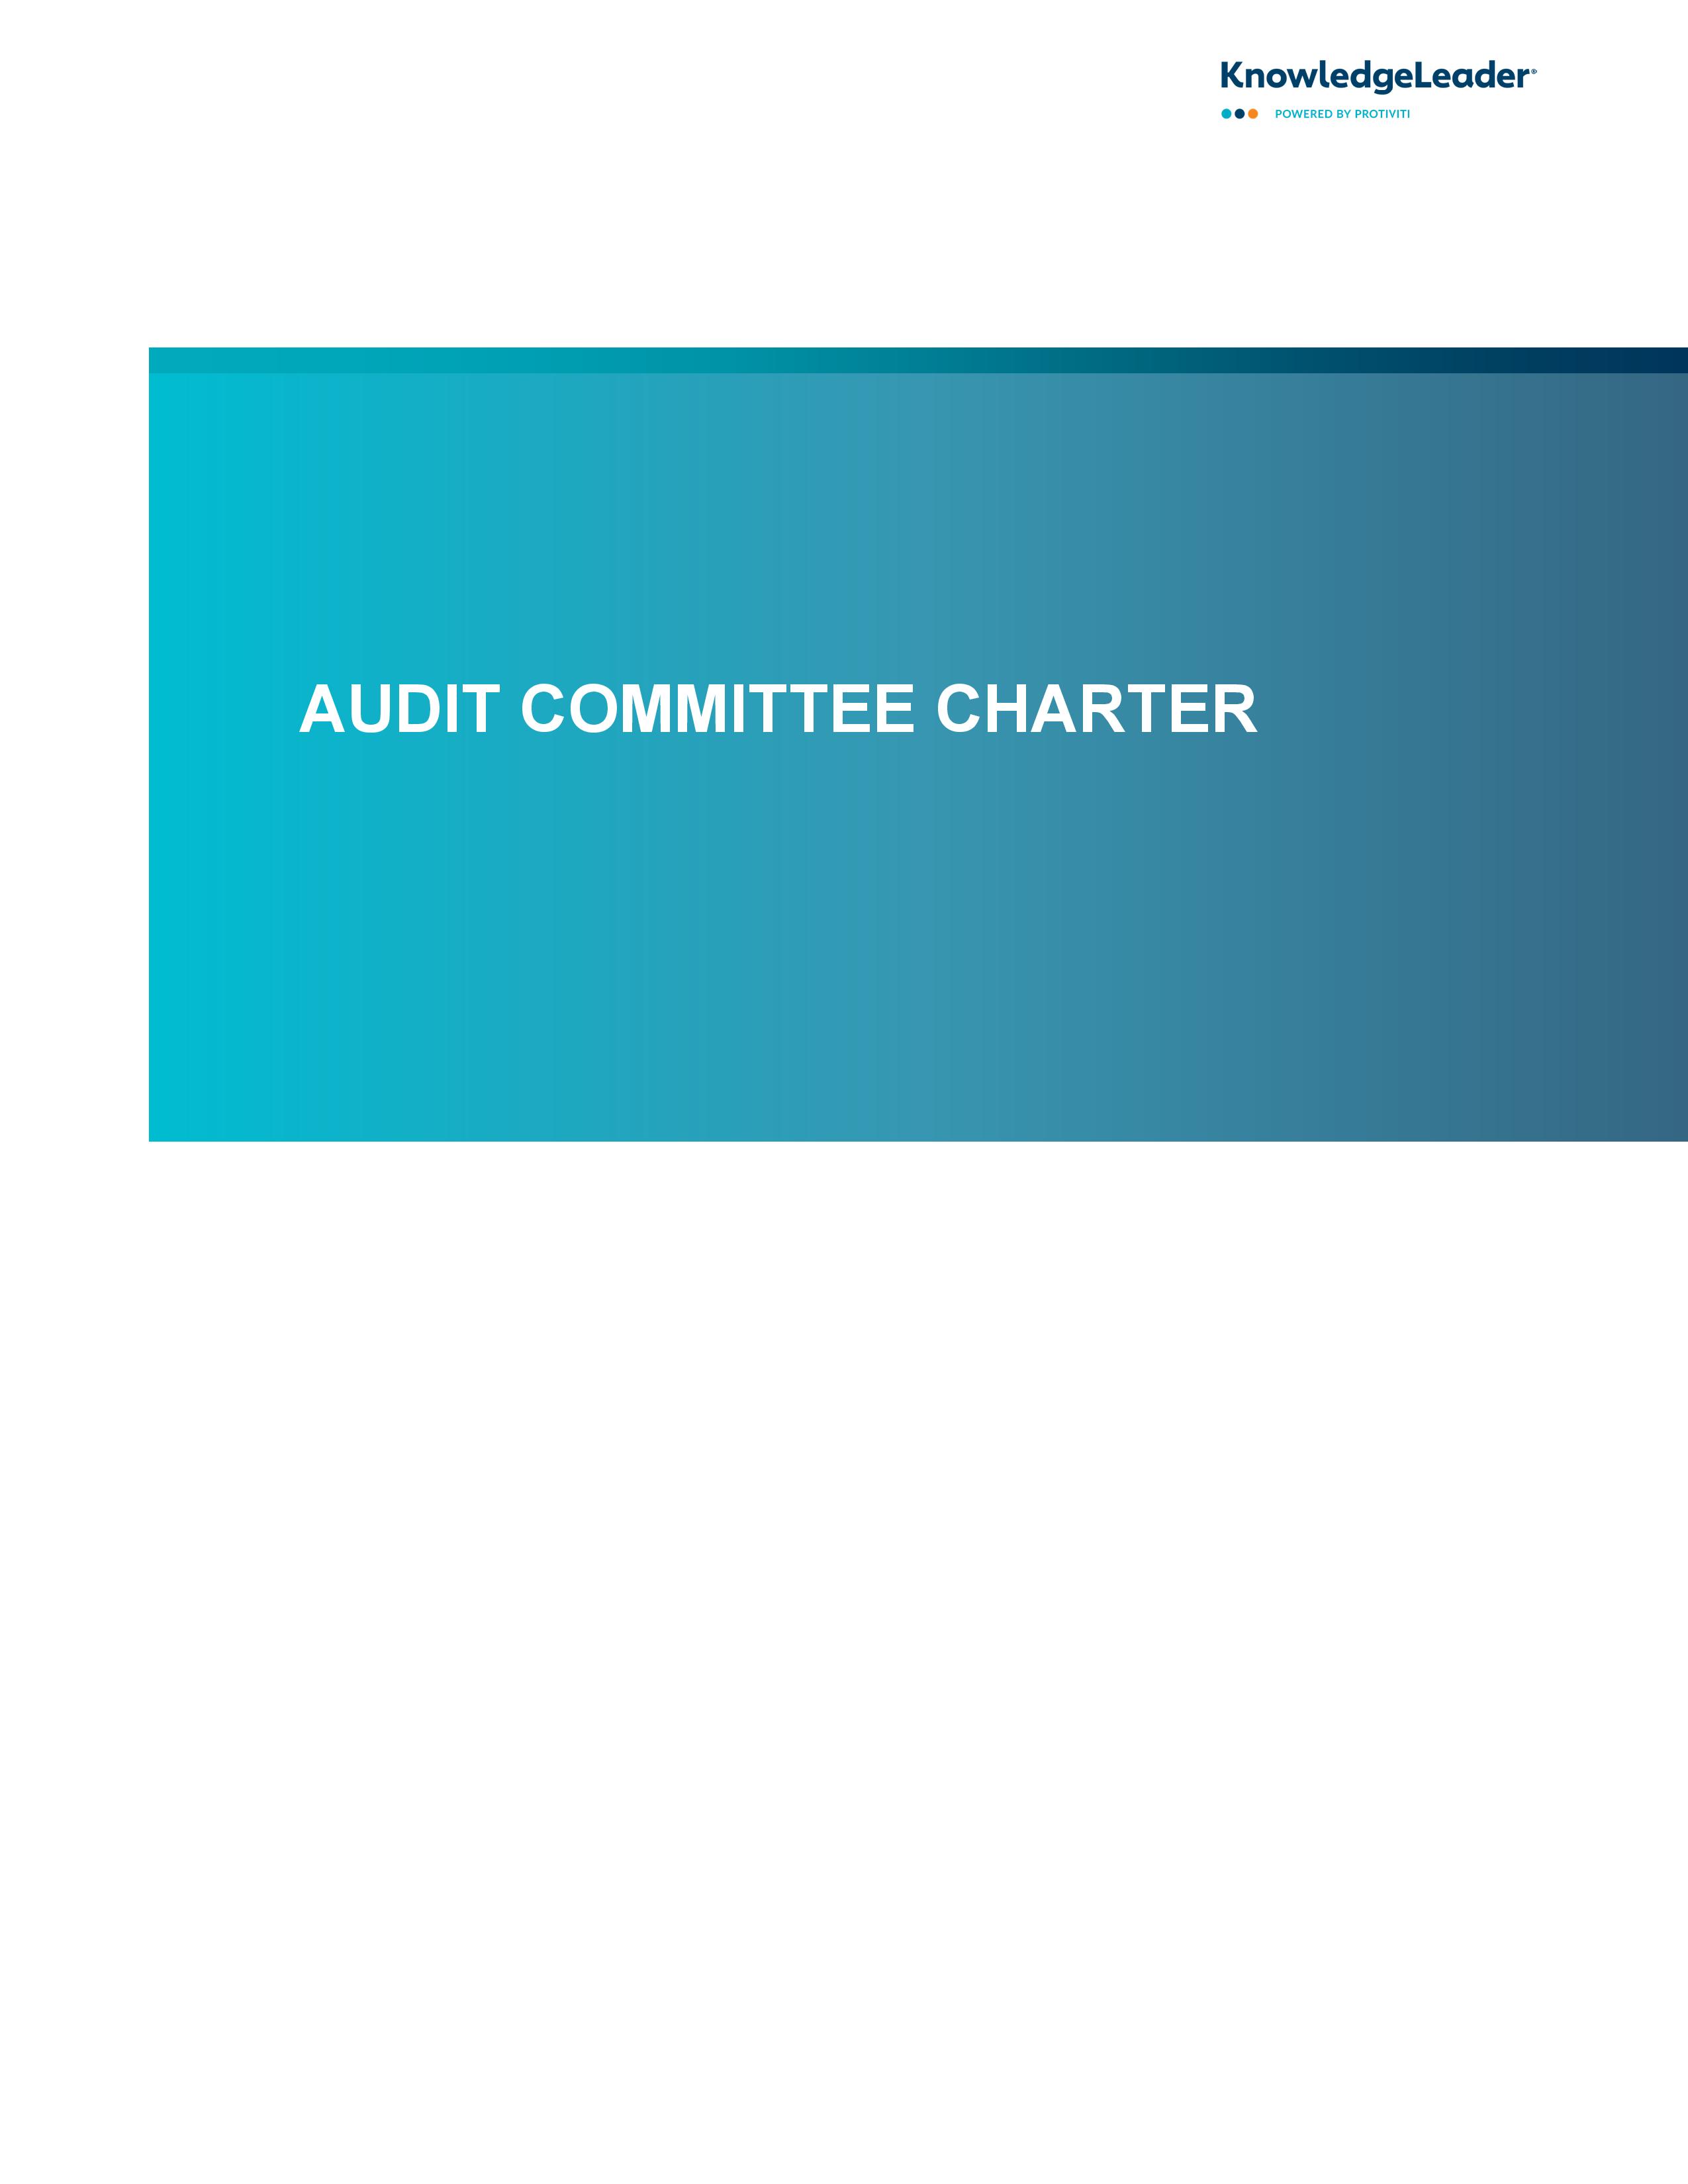 screenshot of the first page of Audit Committee Charter